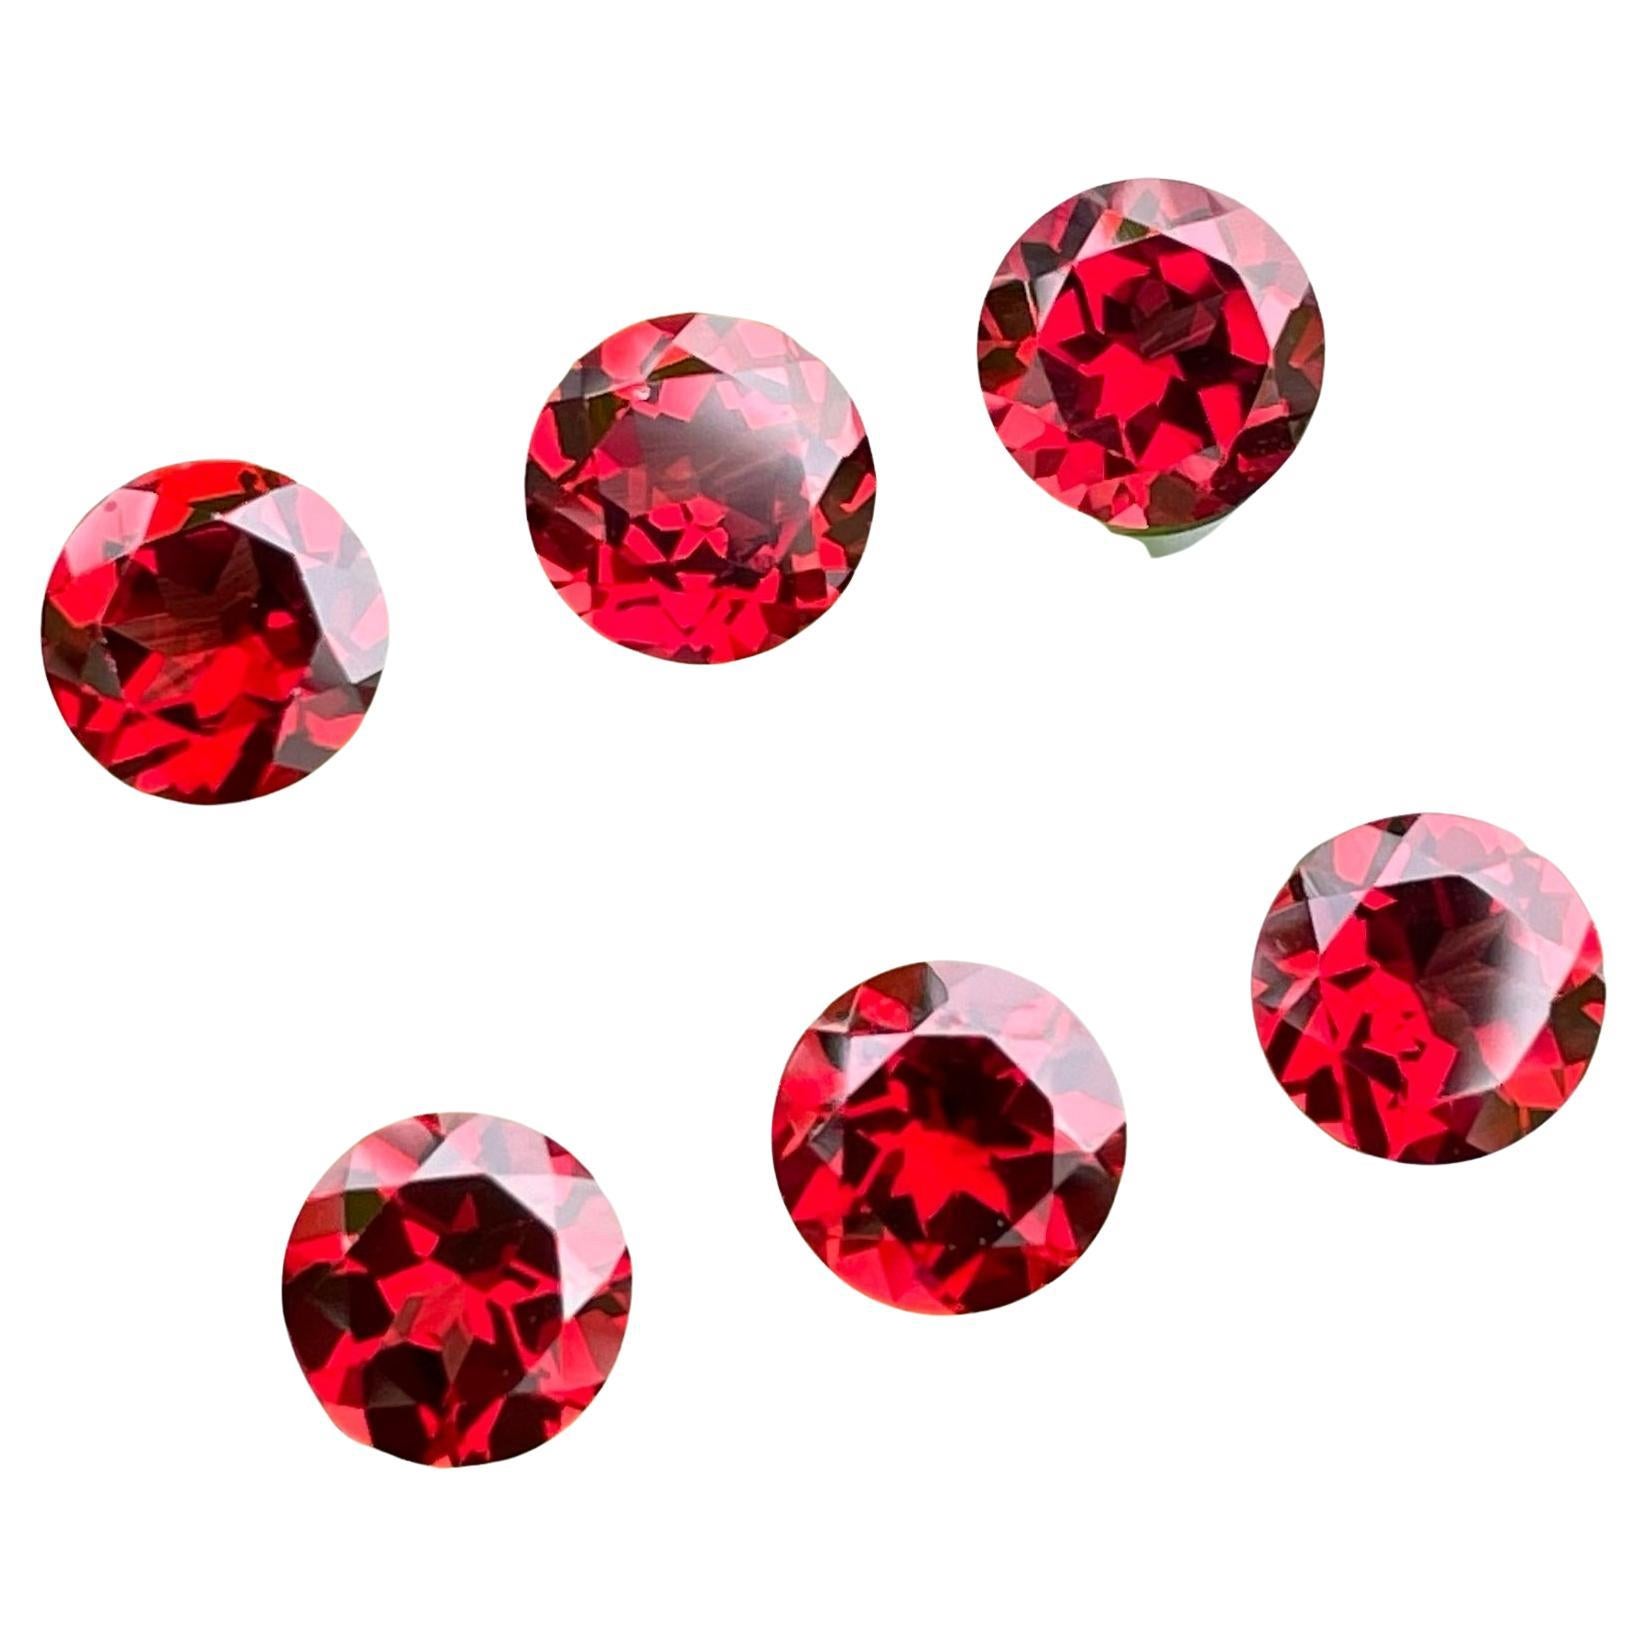 Excellent Cut Red Garnet Stone Natural Malawi Garnet for Jewelry Making 13.50 Ct For Sale